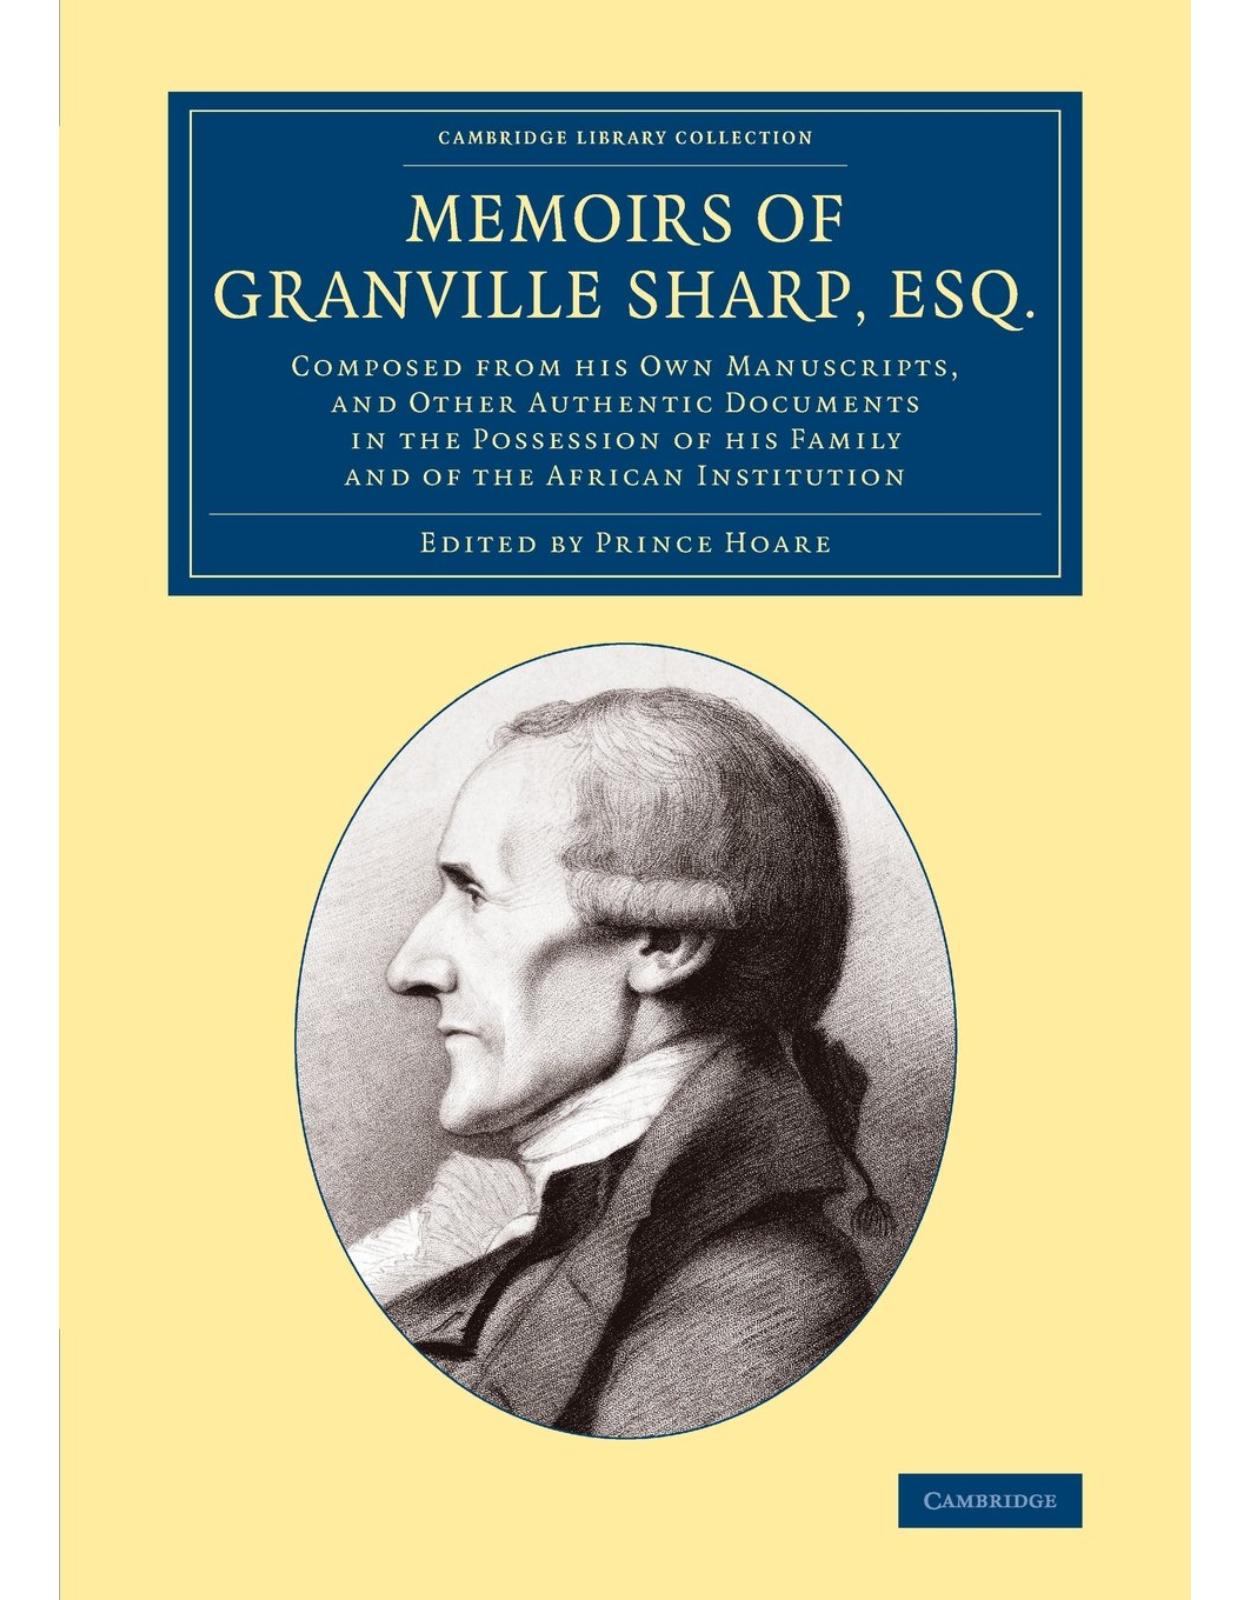 Memoirs of Granville Sharp, Esq.: Composed from his Own Manuscripts, and Other Authentic Documents in the Possession of his Family and of the African ... Library Collection - Slavery and Abolition)